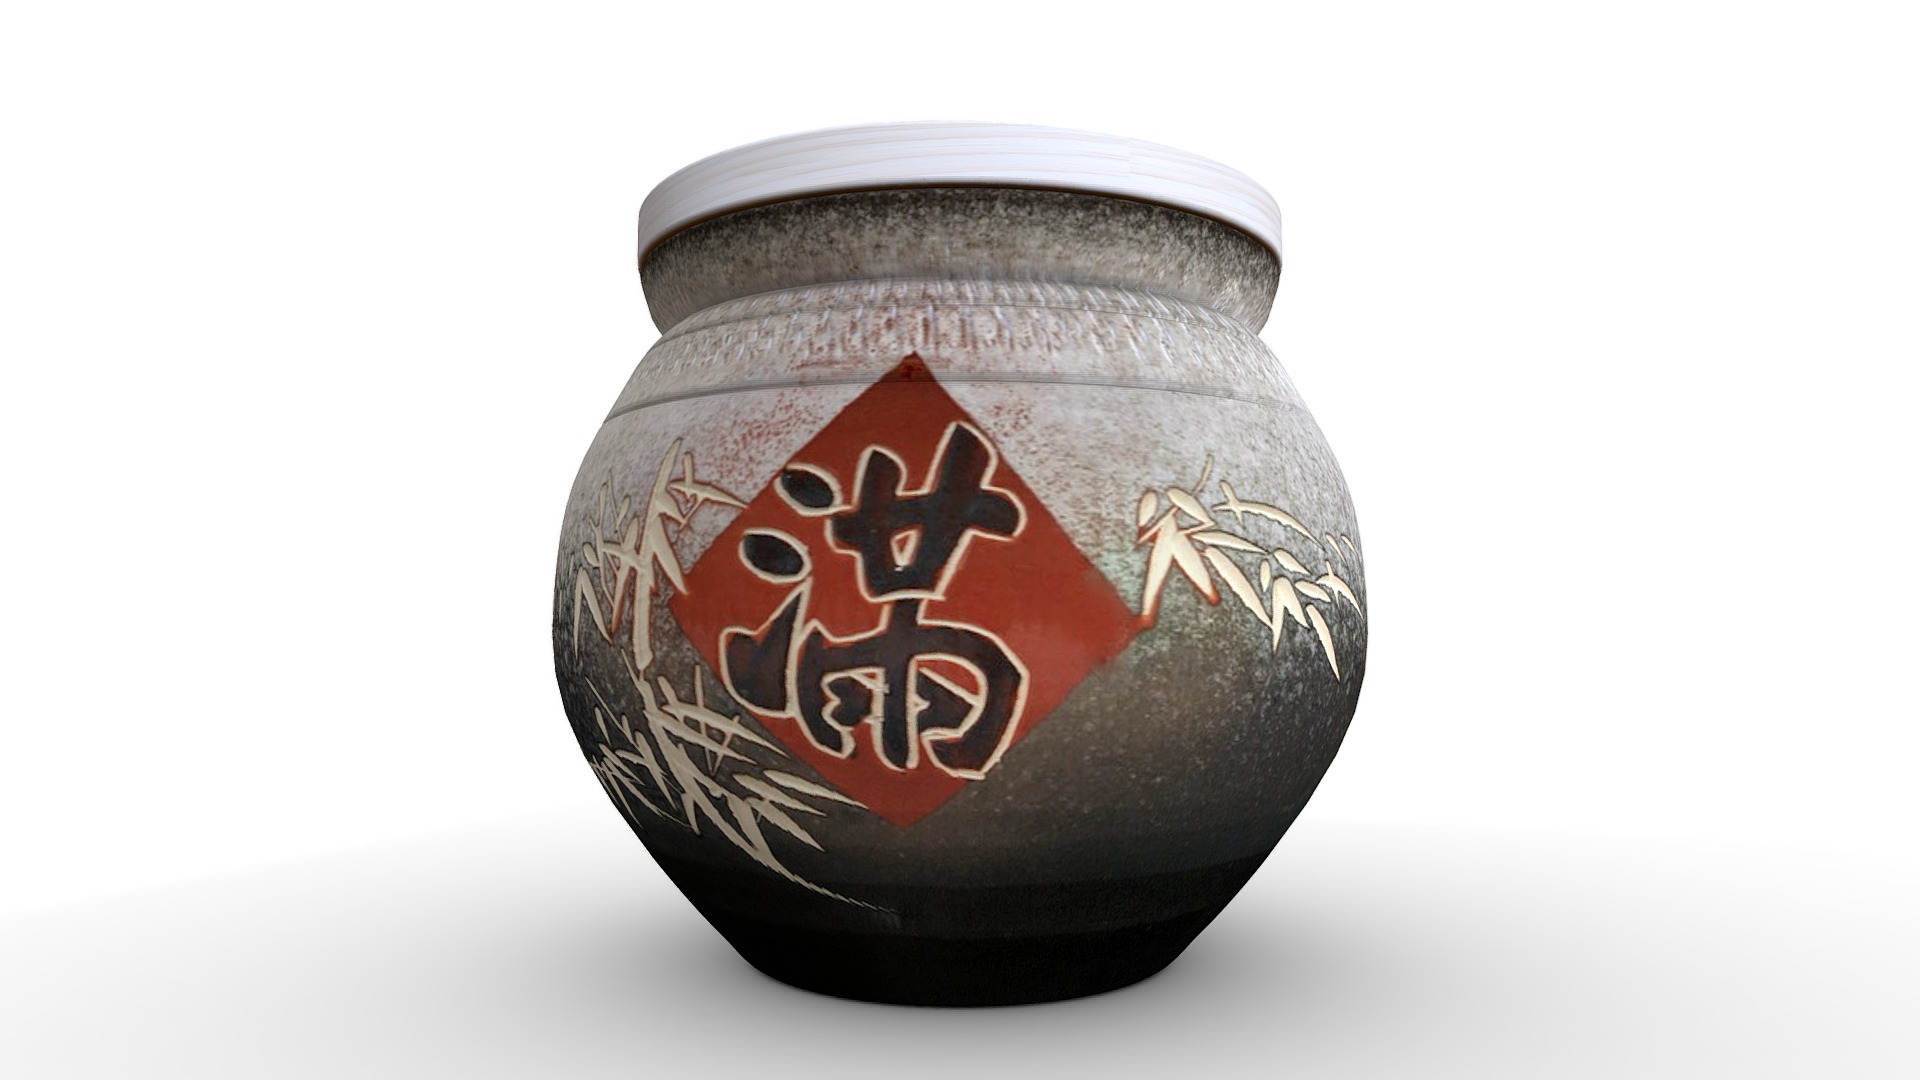 3D model 【3D模擬-上等】10斤黑白漸層『 滿竹 』米甕展示 - This is a 3D model of the 【3D模擬-上等】10斤黑白漸層『 滿竹 』米甕展示. The 3D model is about a jar with a graphic design on it.